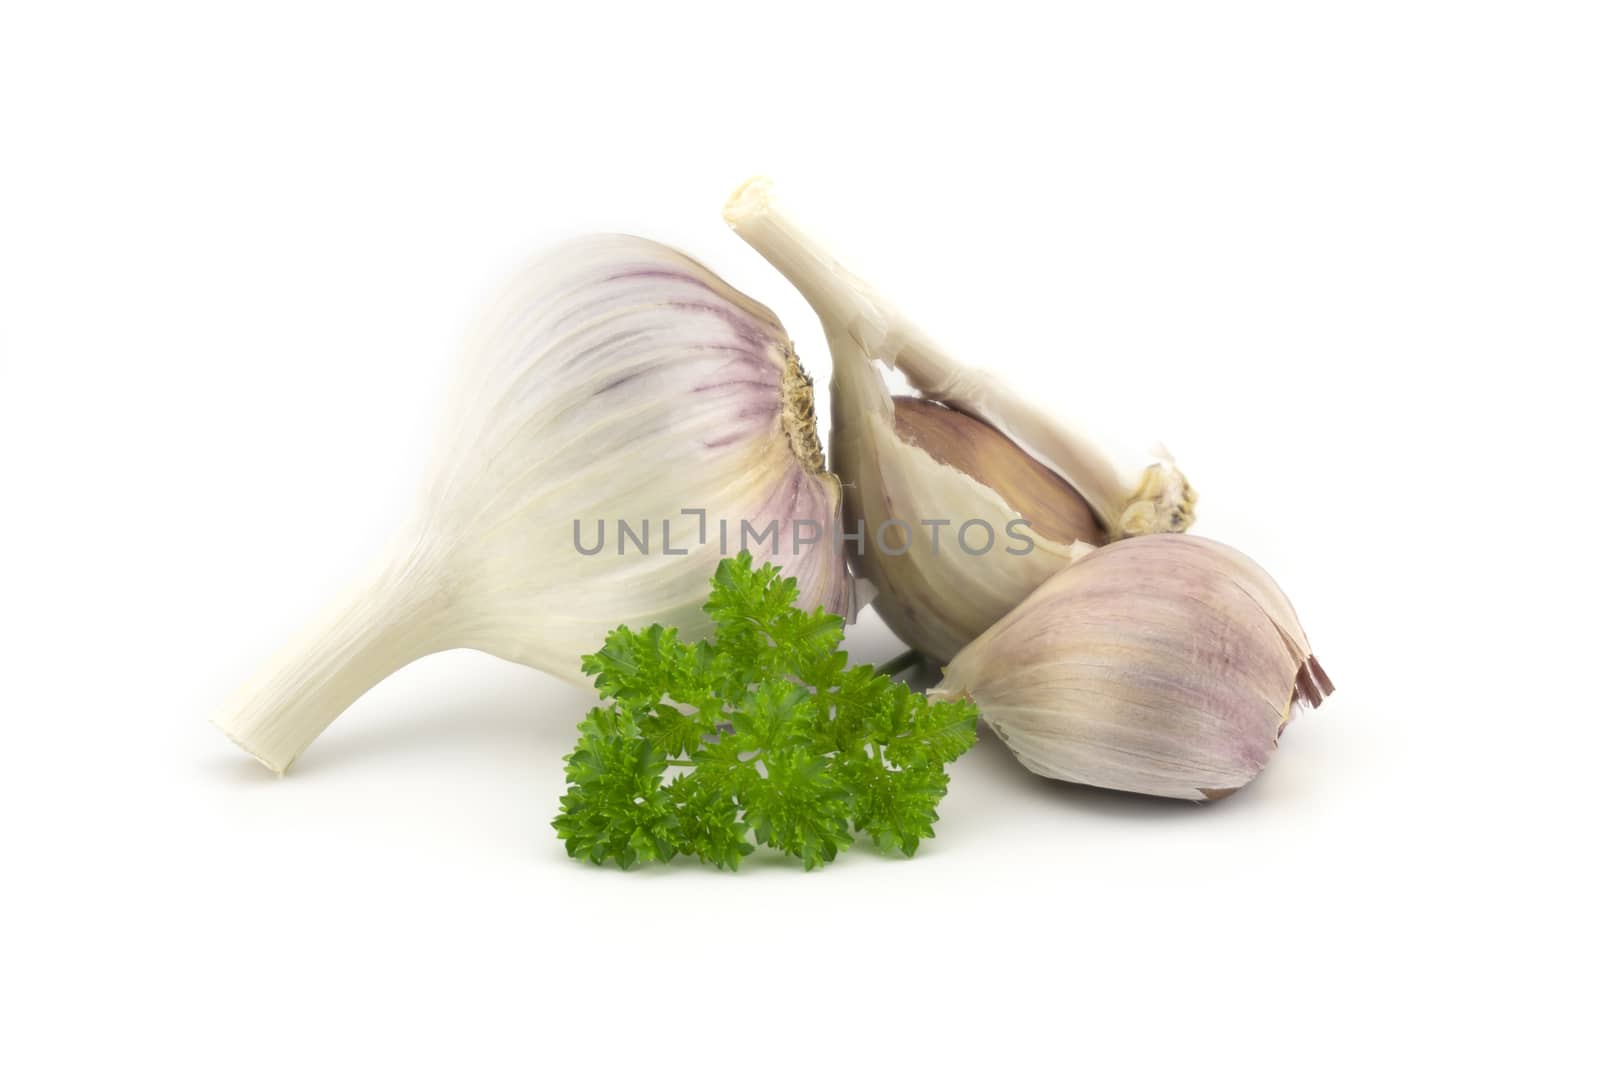 Garlic bulbs, cloves and green parsley twig in close-up isolated on white background